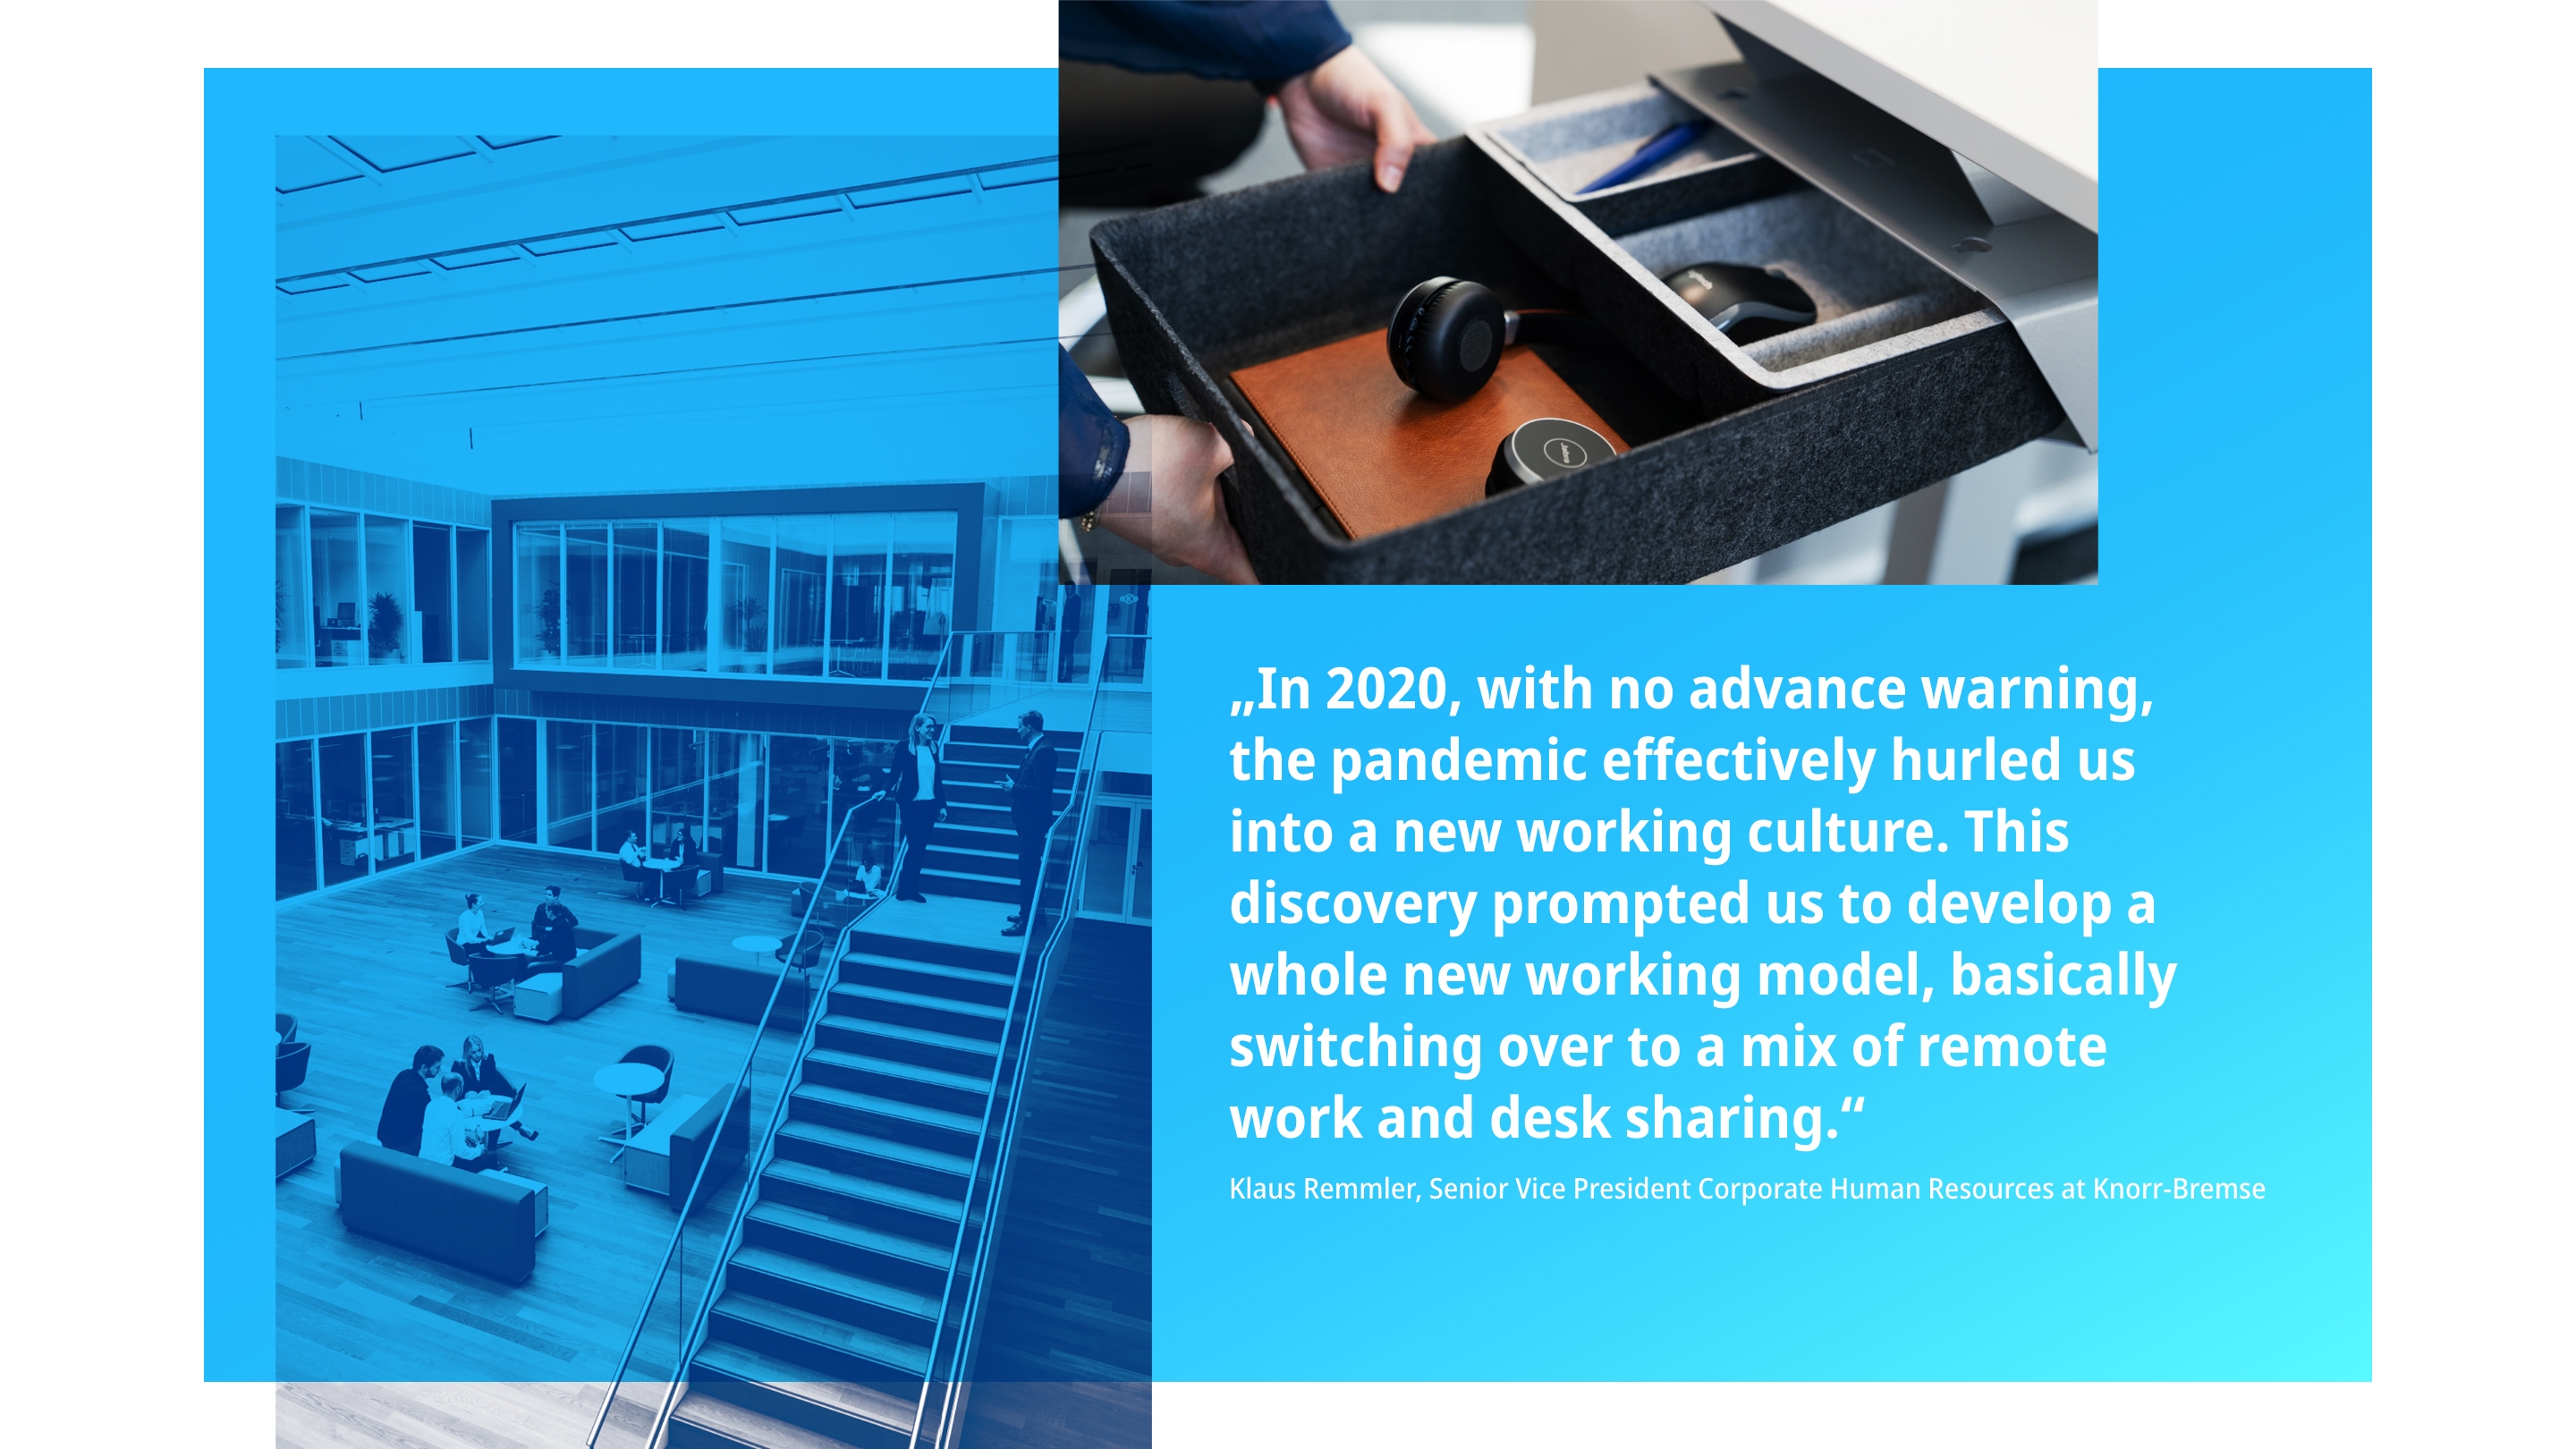 Photo collage of a lounge area at the Munich site, a personal mobile drawer and a quote from Senior Vice President Corporate Human Resources Klaus Remmler